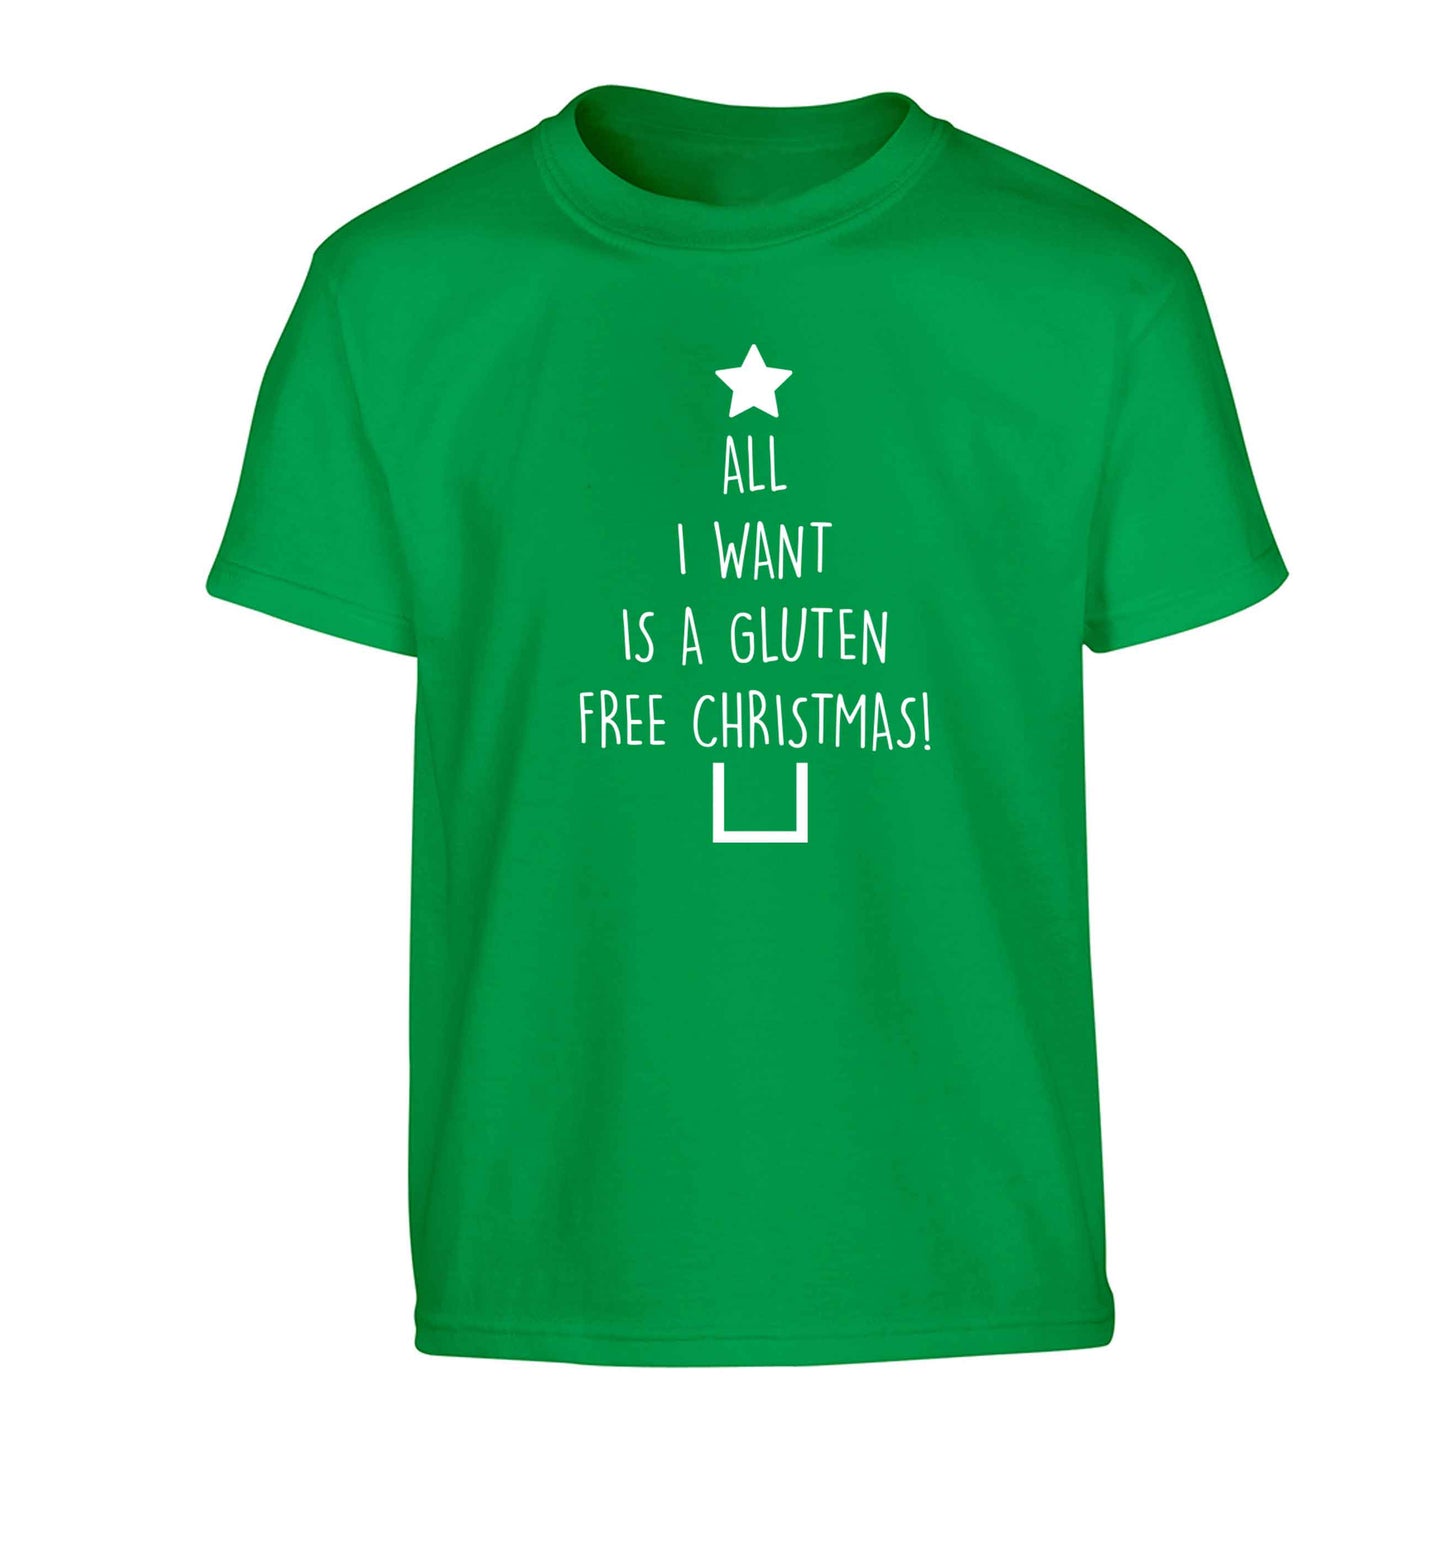 All I want is a gluten free Christmas Children's green Tshirt 12-13 Years